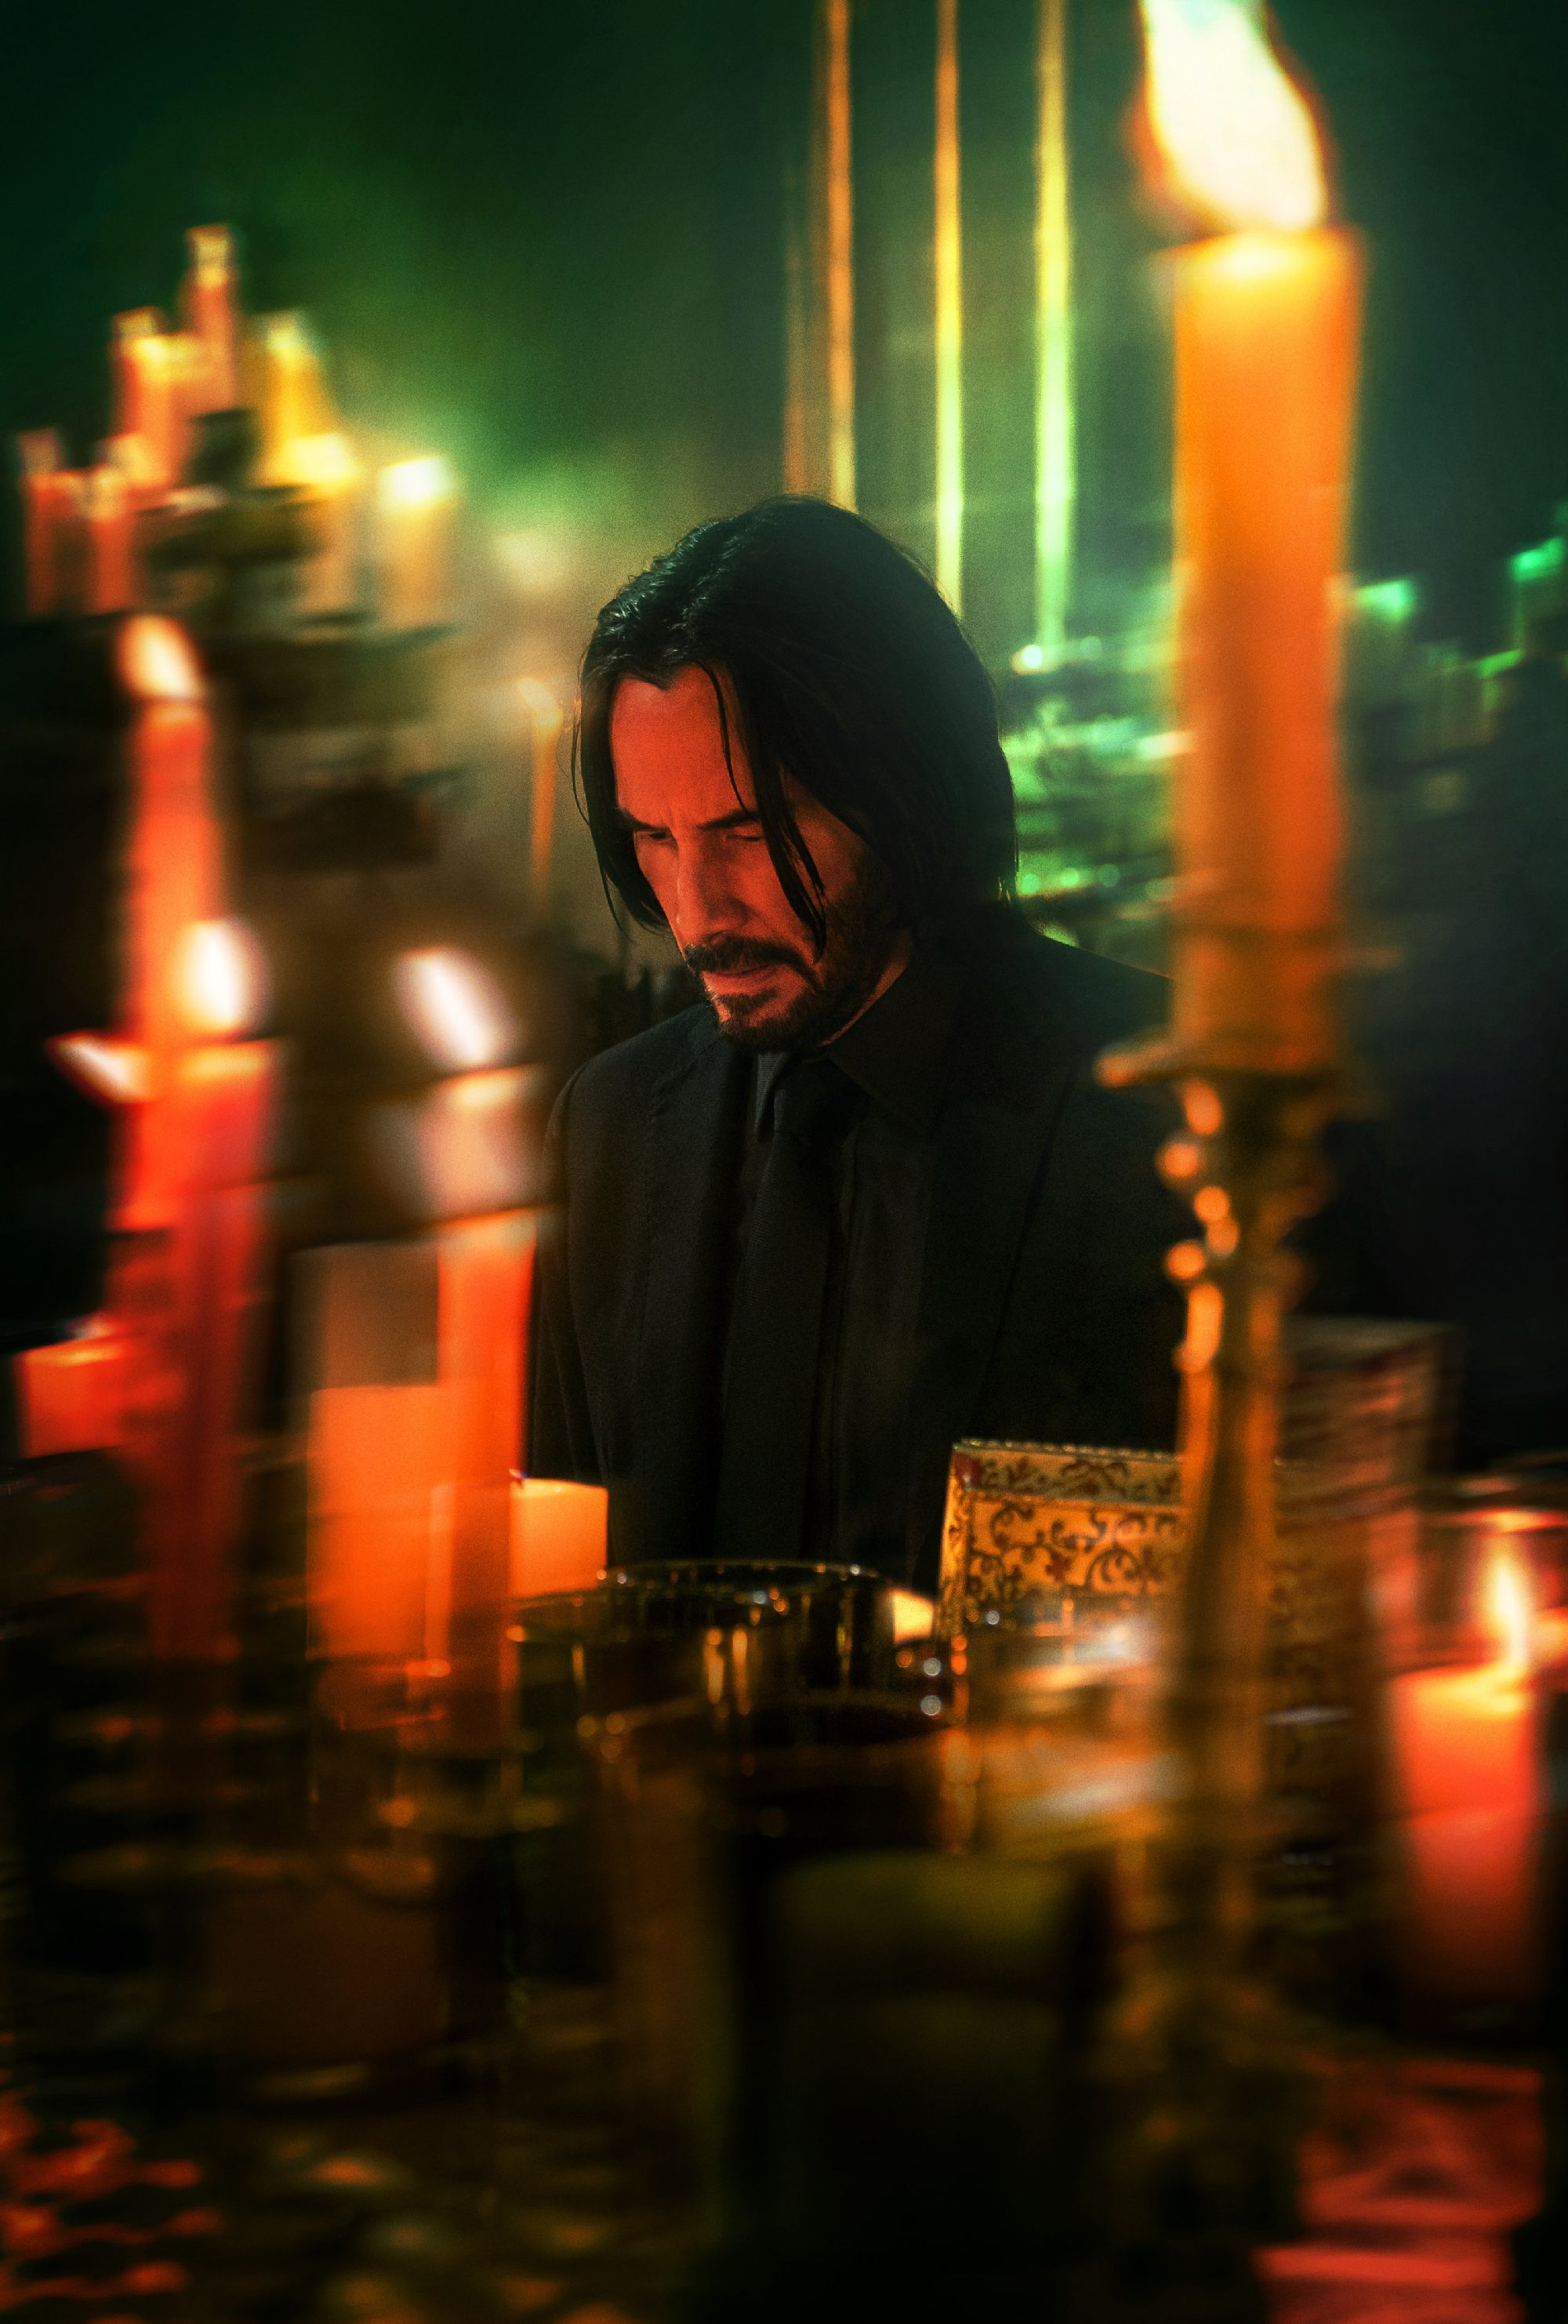 This is what actor Keanu Reeves looks like in "John Wick 4".  (Lionsgate)